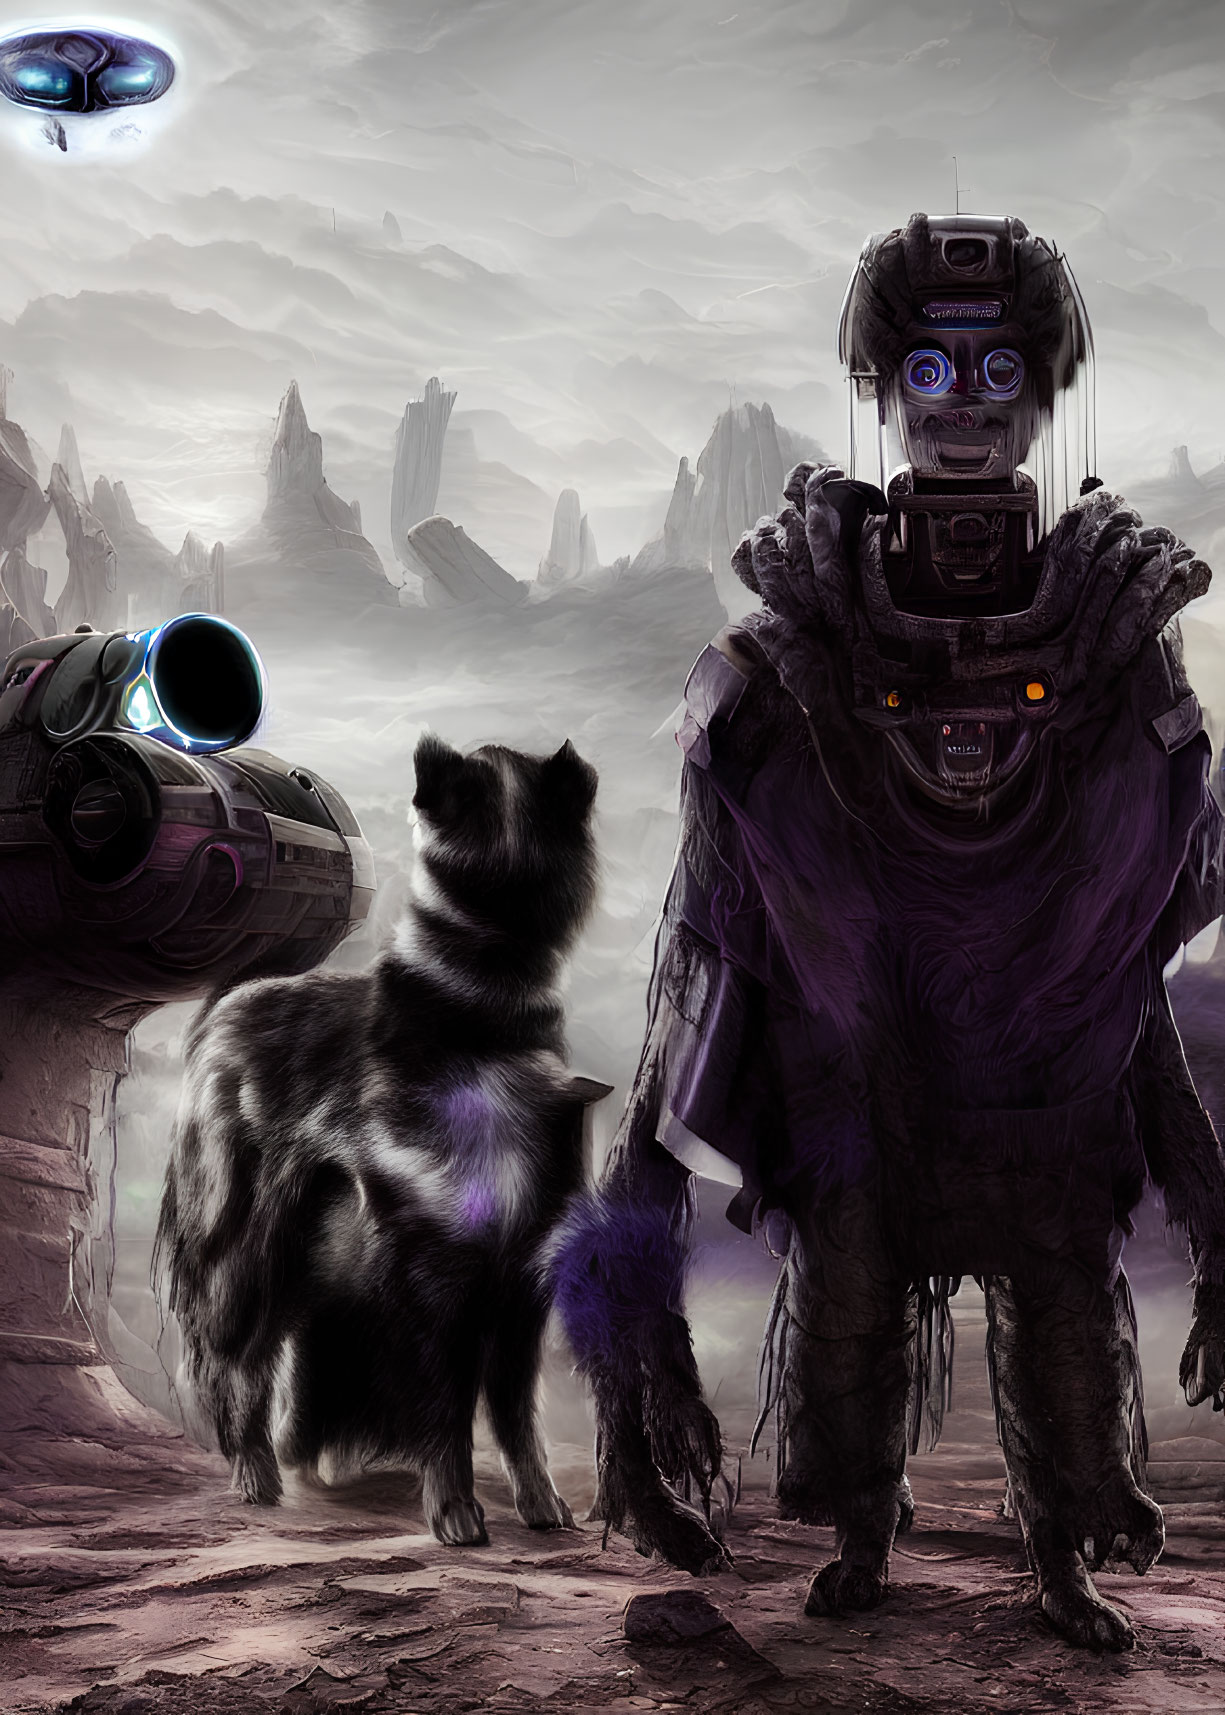 Robot and wolf in tattered space gear on alien landscape with spaceship